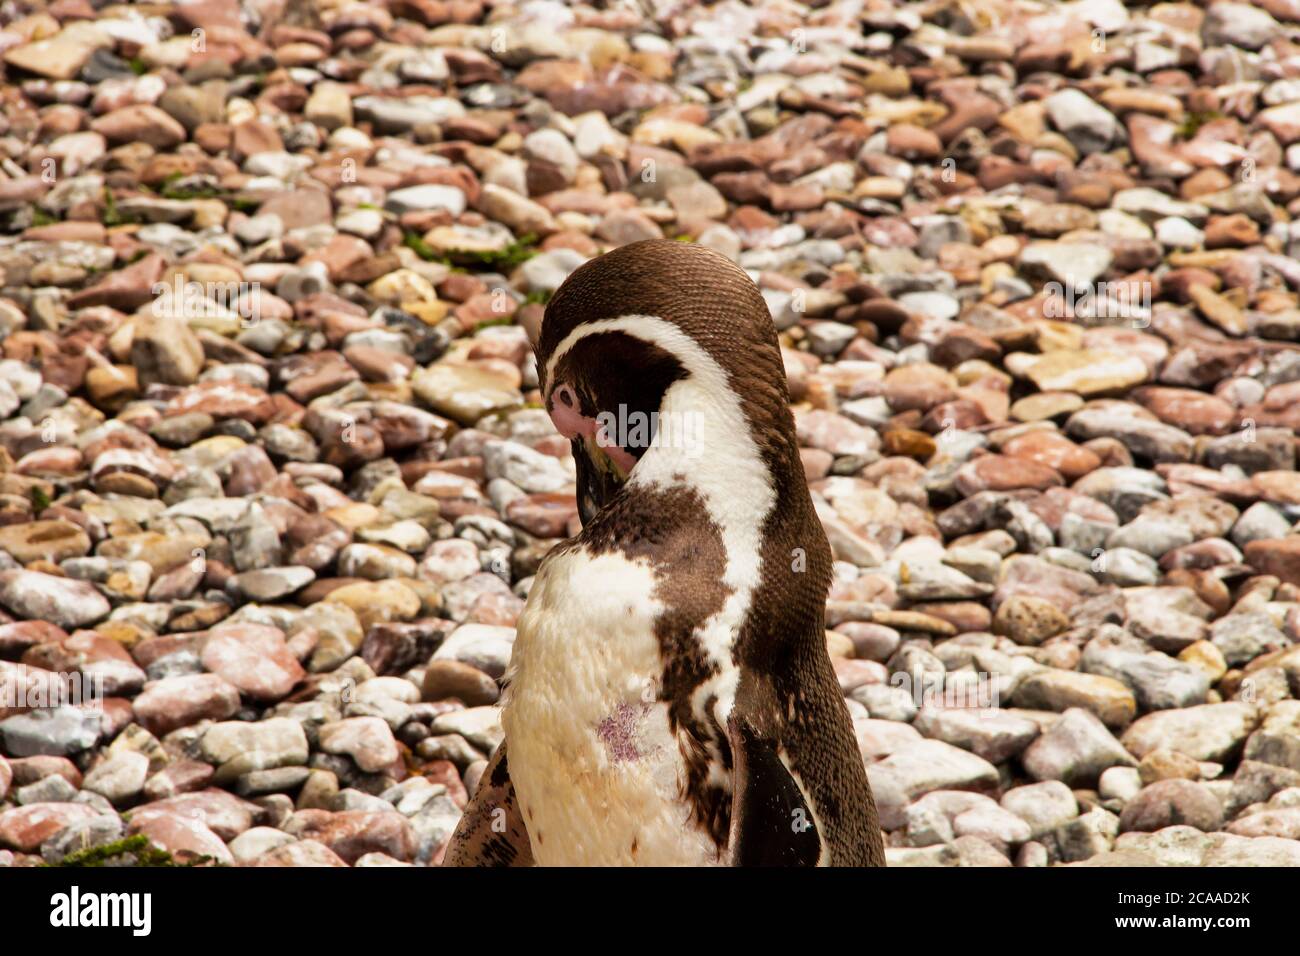 View of a Humboldt penguin on a stone beach, Spheniscus humboldti, from the genus Jackass penguins Stock Photo